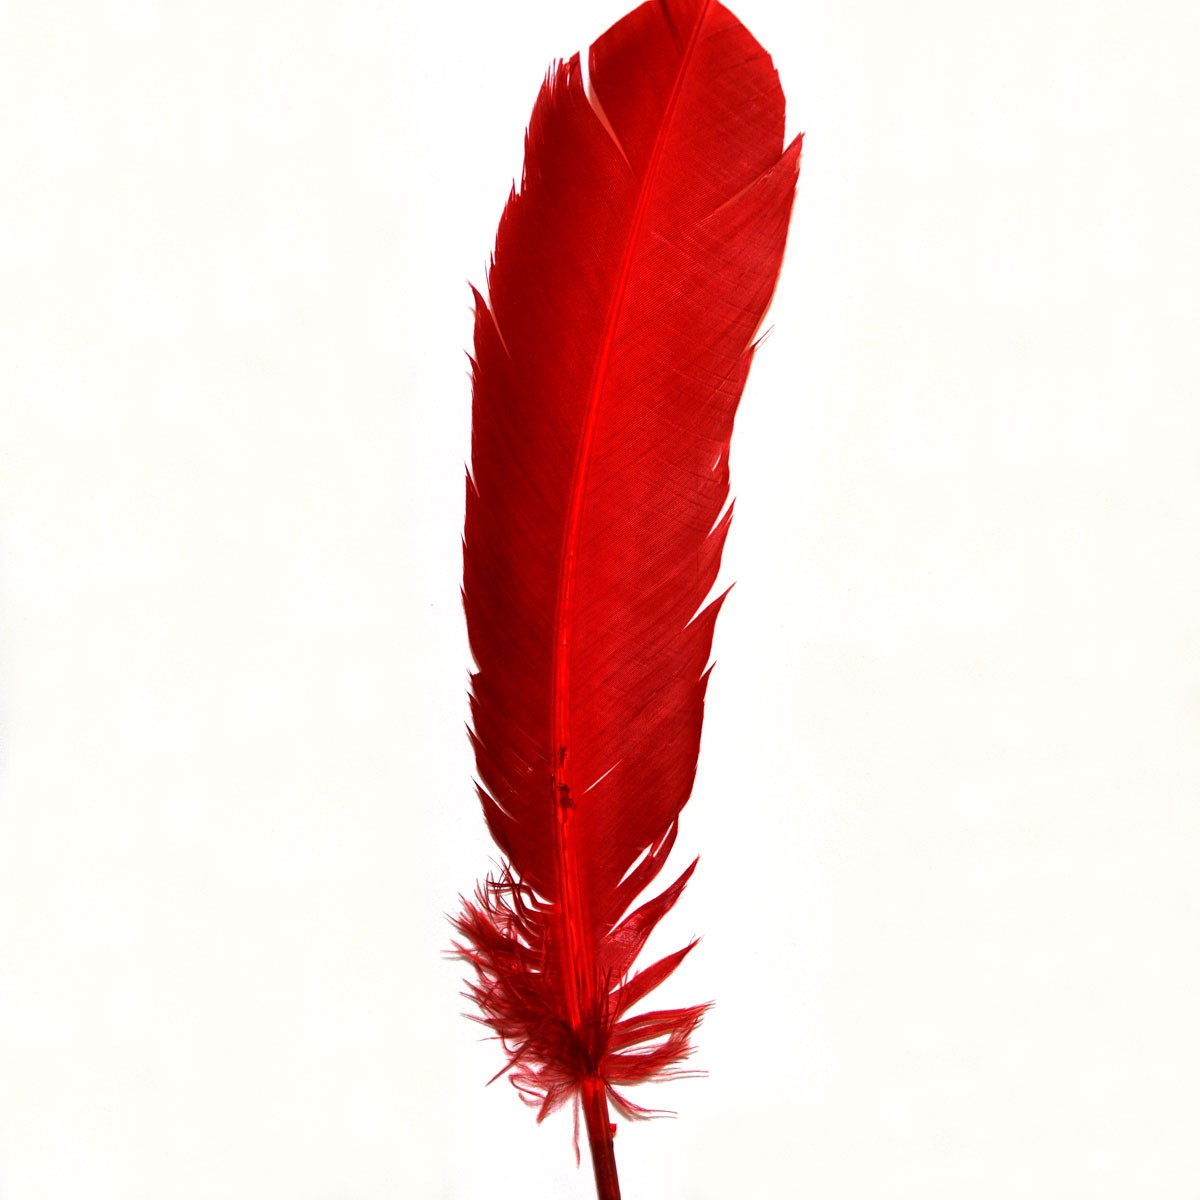 Red Indian Feather Clip Art